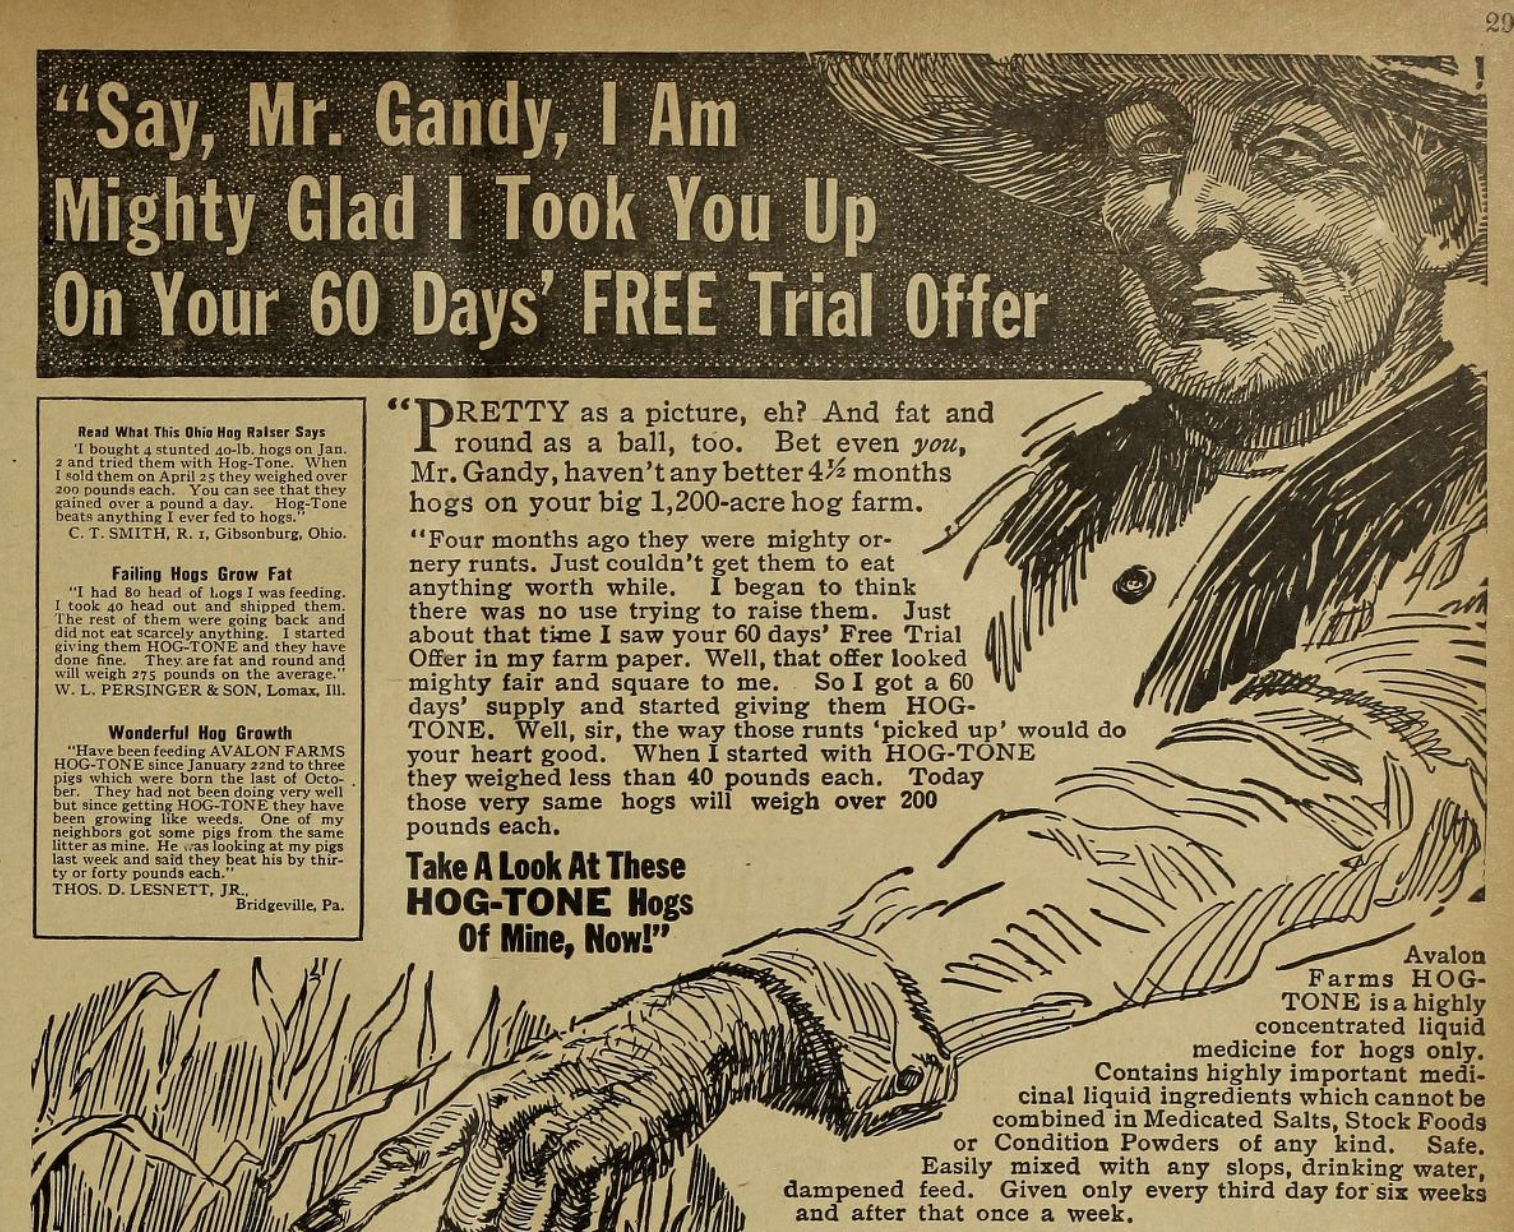 Say, Mr. Gandy, I Am Mighty Glad I Took You Up On Your 60 Days' FREE Trial Offer